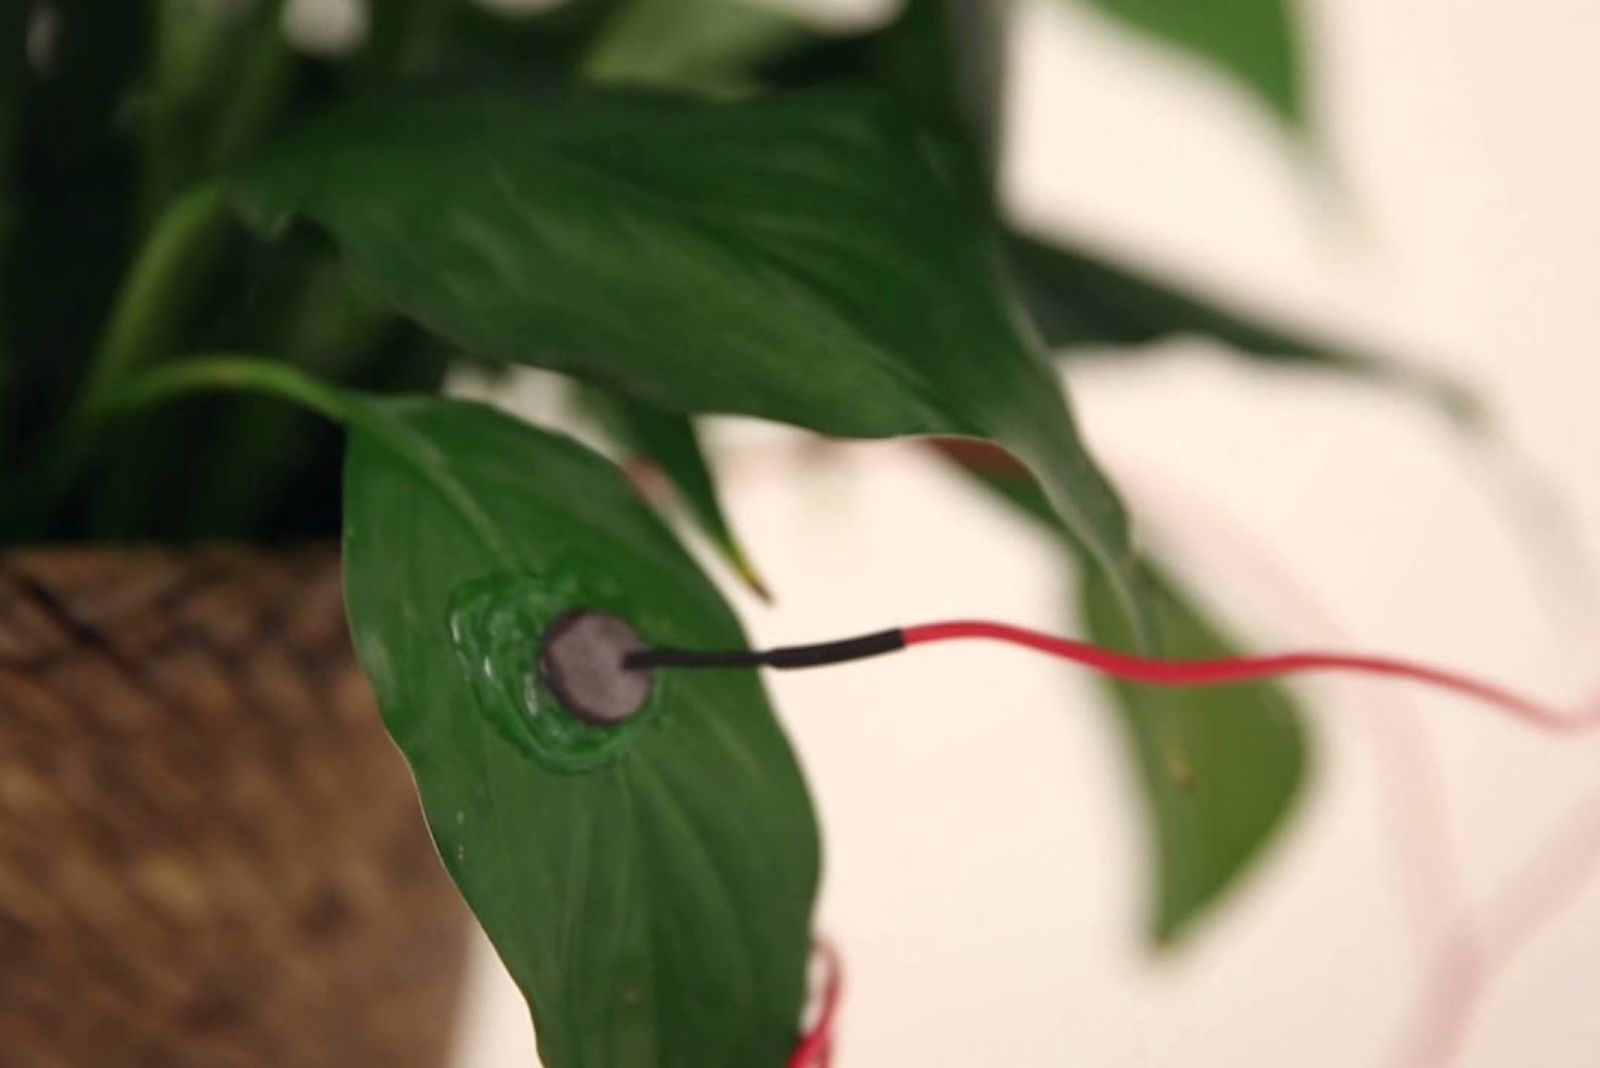 the leaf of a plant that produces sound